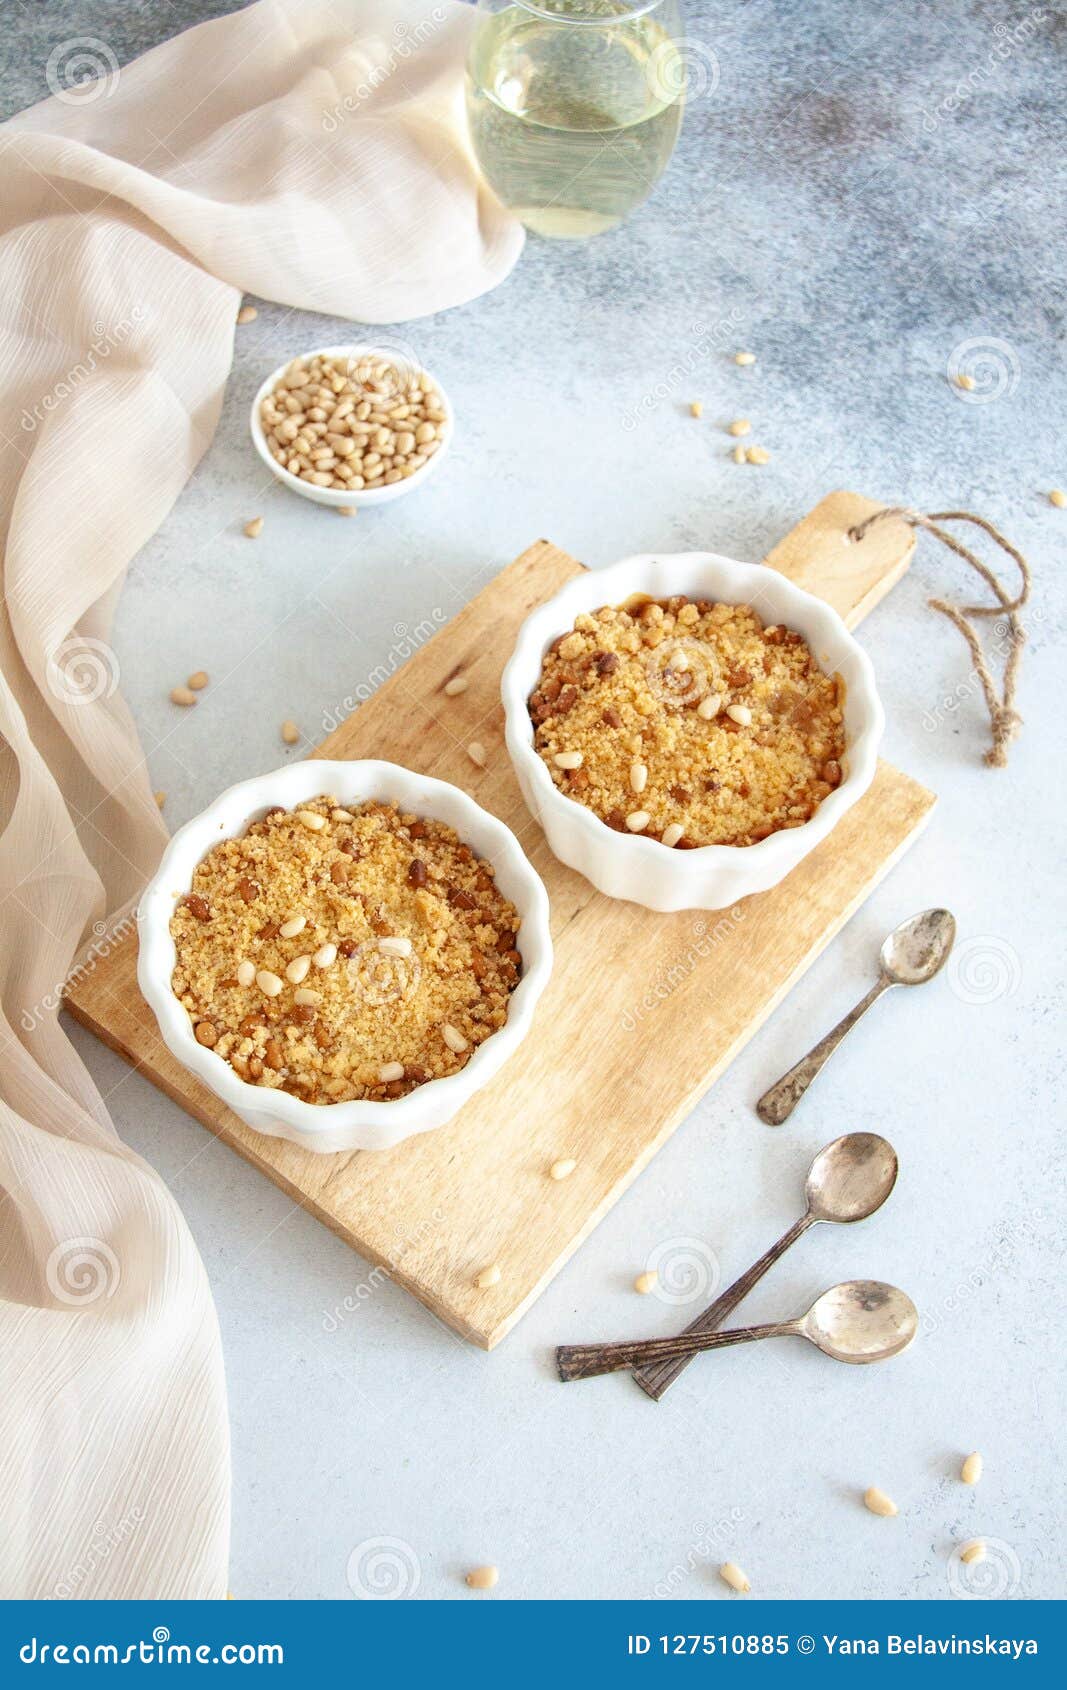 Baked Dessert with Pear and Nuts in a Small White Bowl Stock Image ...